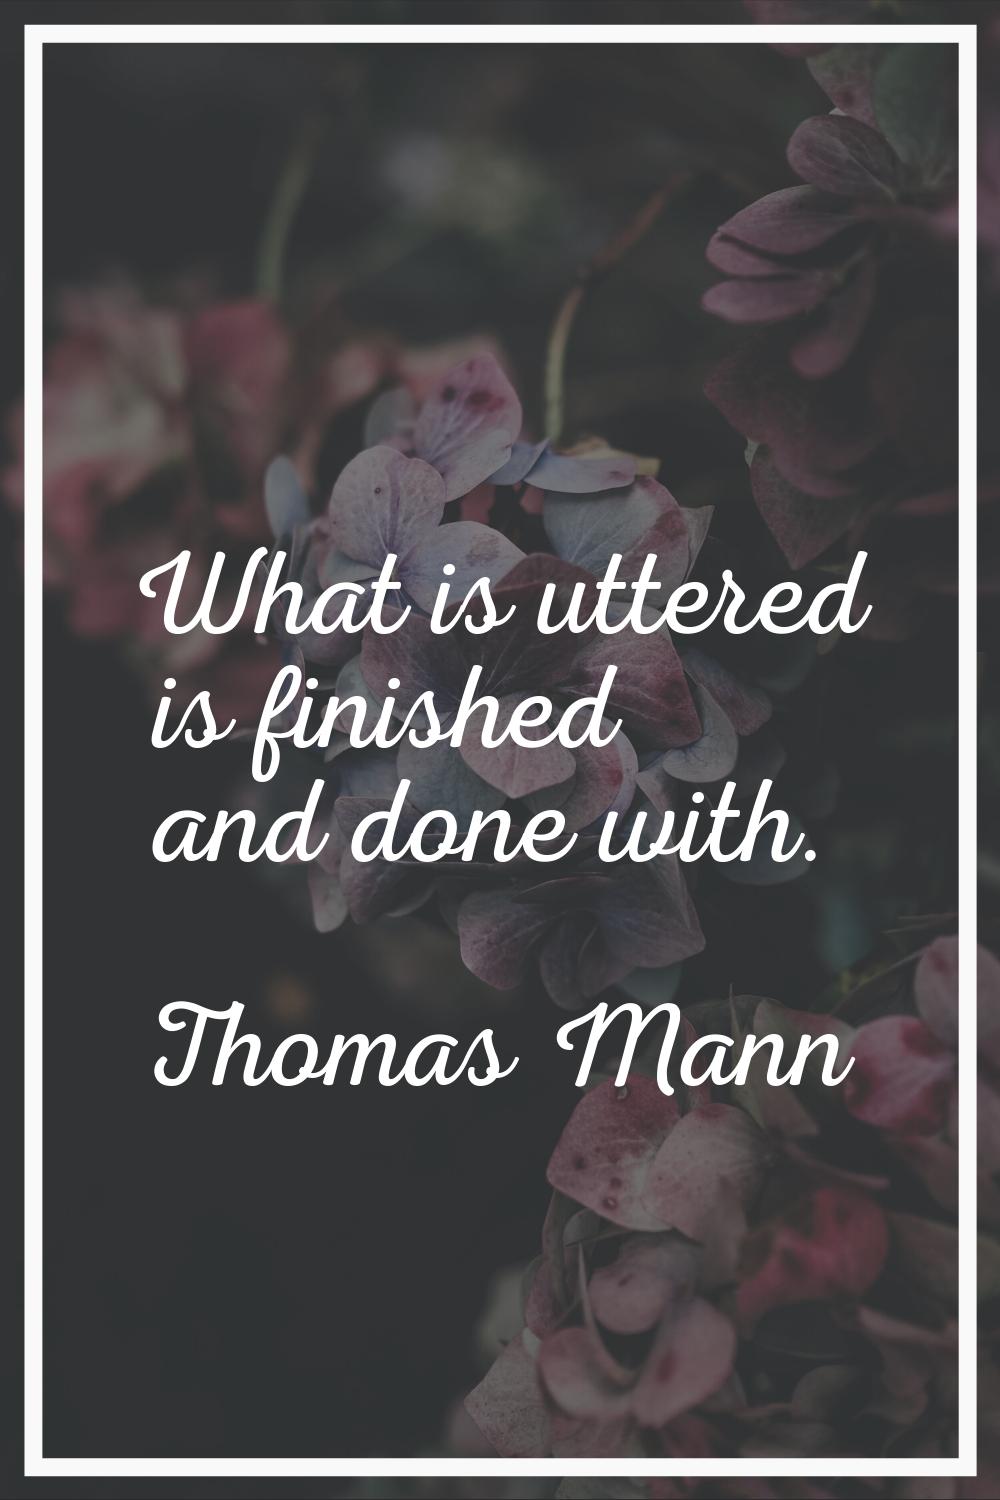 What is uttered is finished and done with.